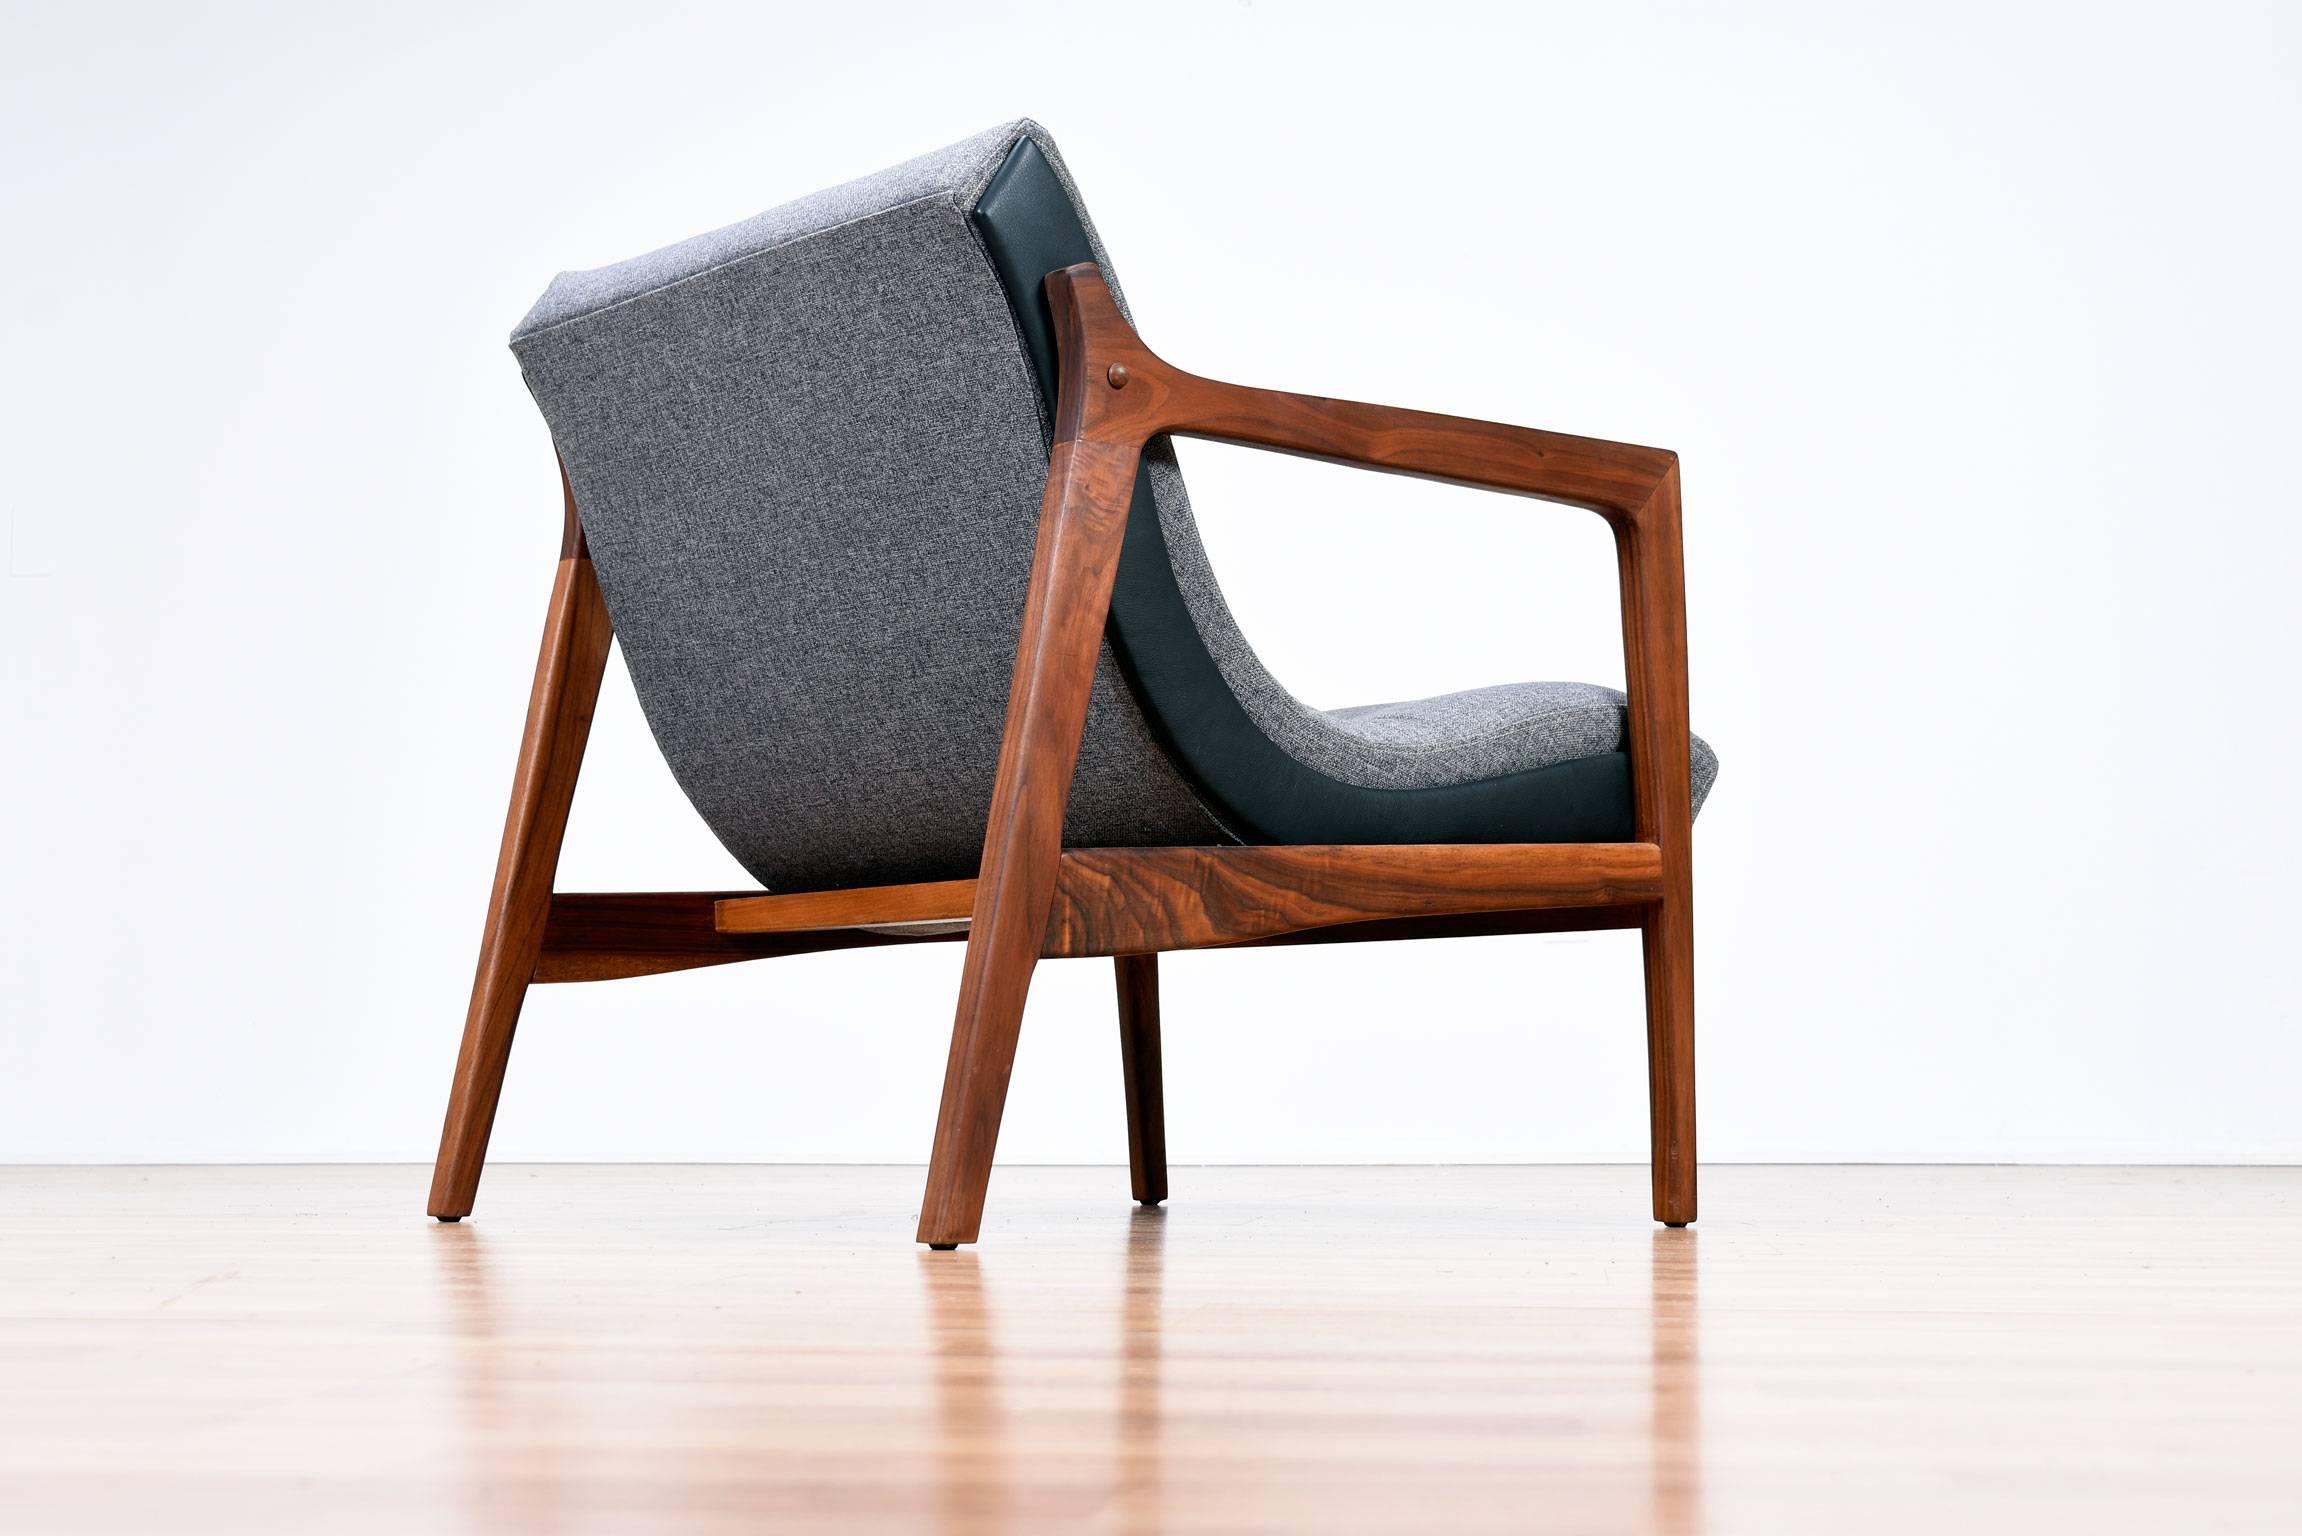 Showstopping Mid-Century Modern scoop chair. This chair has been completely, professionally restored to take center stage at your home. The duo tone design is accomplished with new slate gray tweed style upholstery juxtaposed to black vinyl boxing